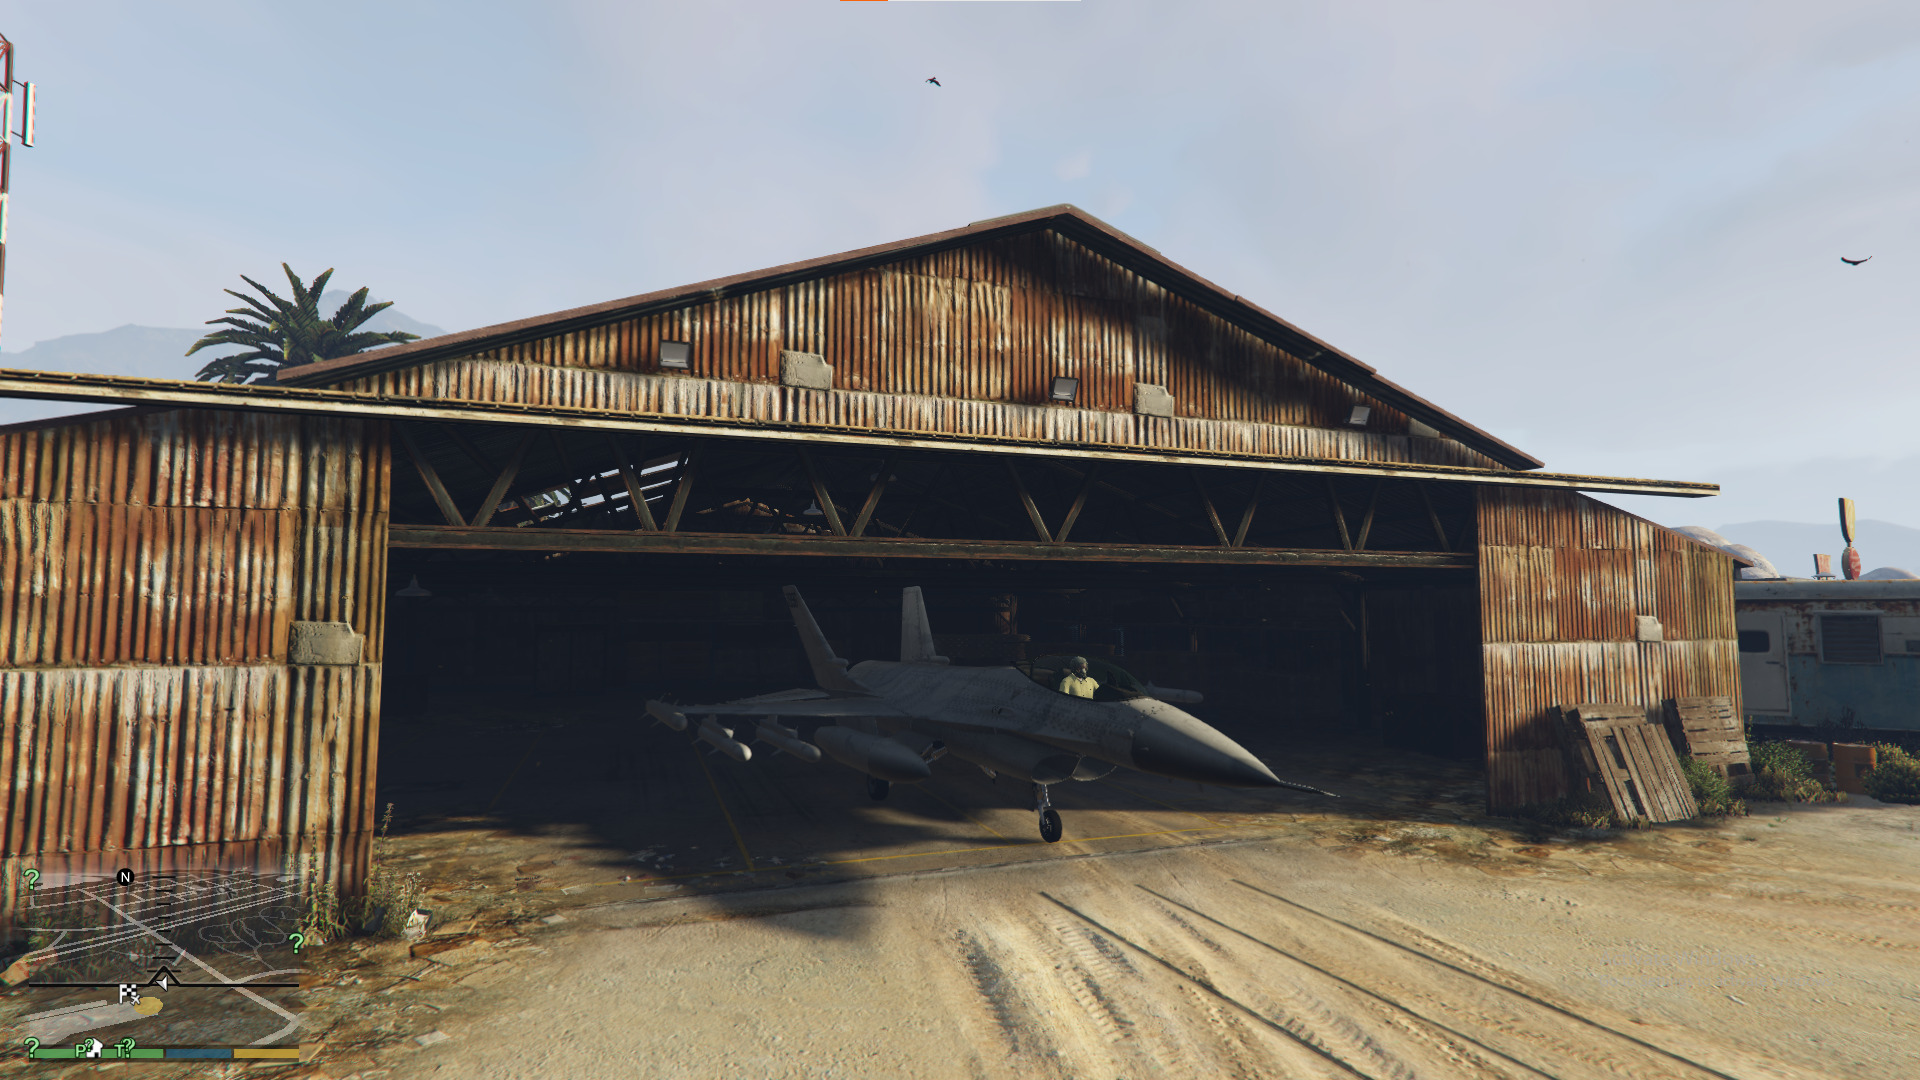 Save planes and jets in GTA V by parking them in your hangar. 